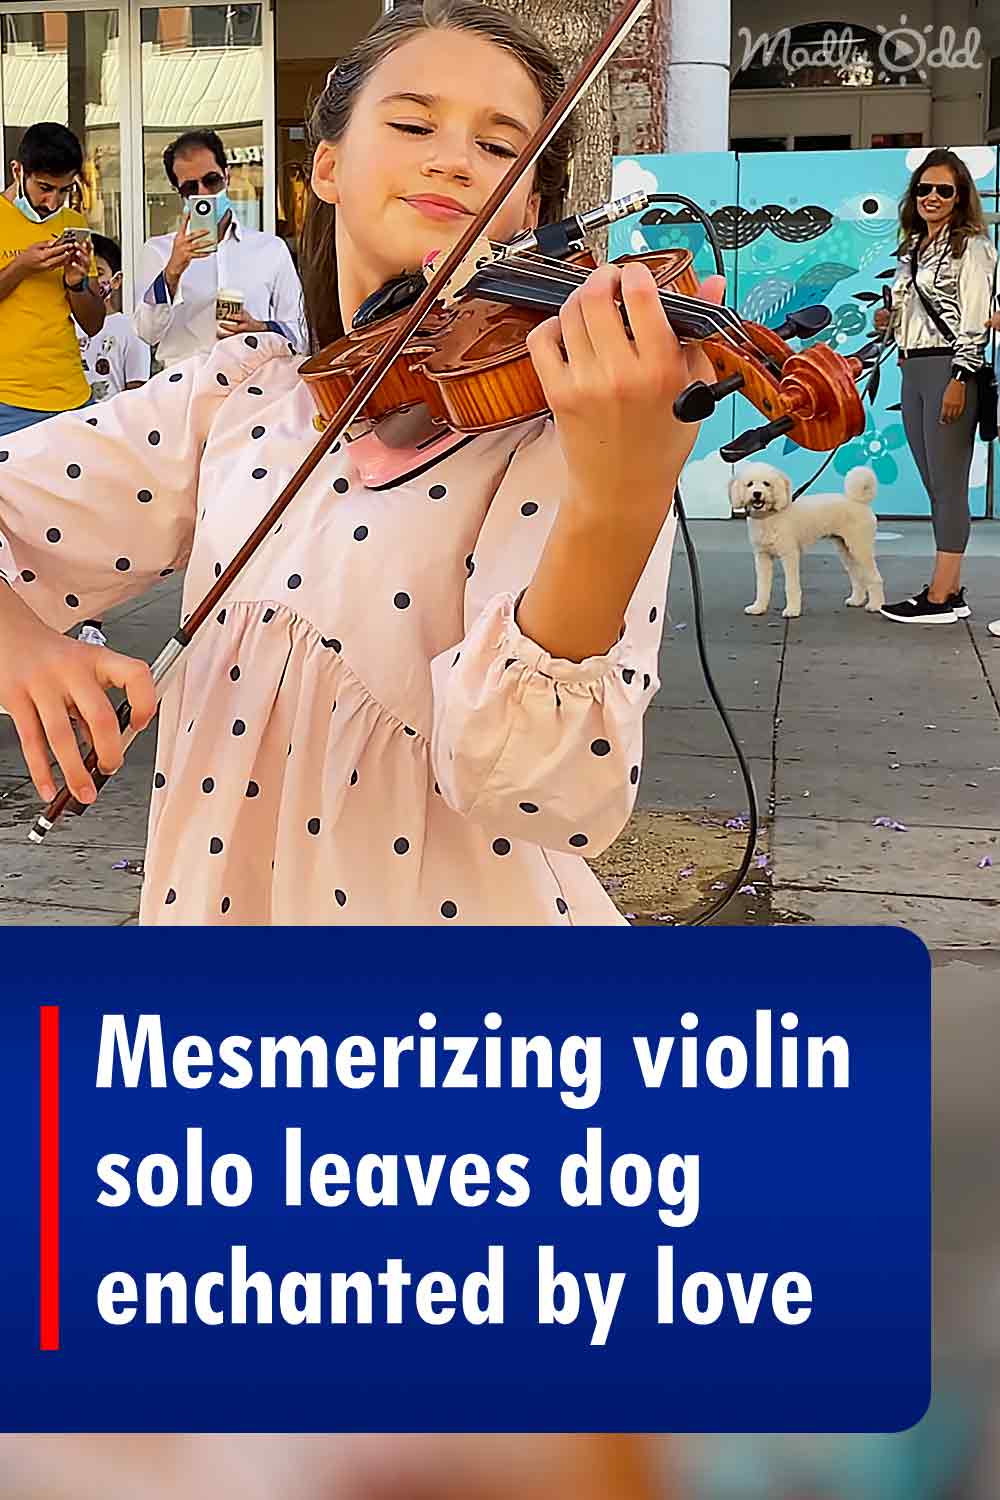 Mesmerizing violin solo leaves dog enchanted by love